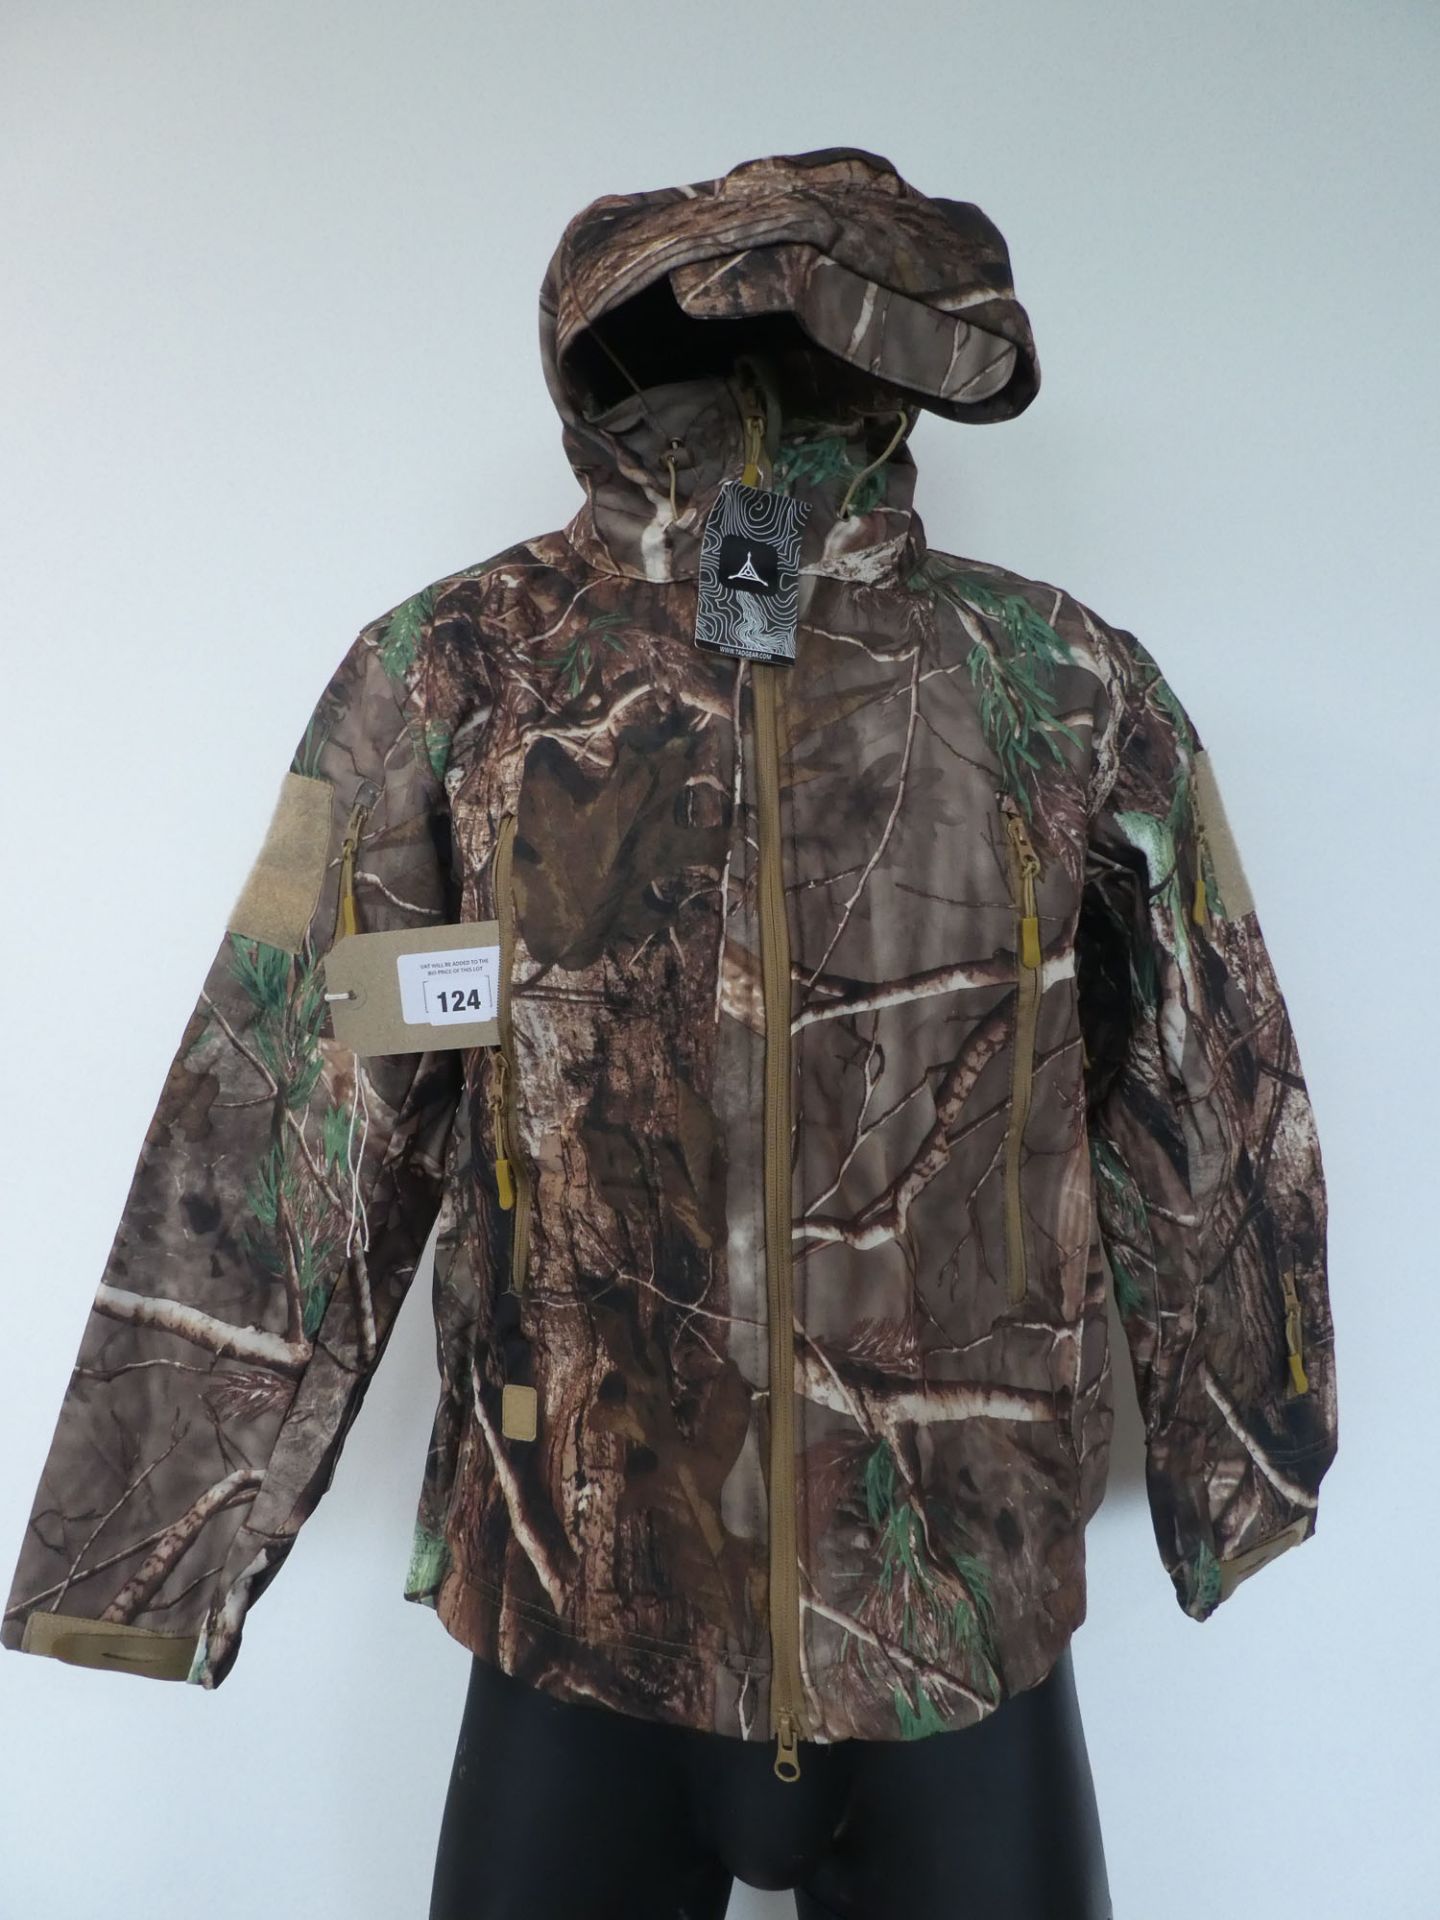 Tad Gear windproof camouflage jacket size XS